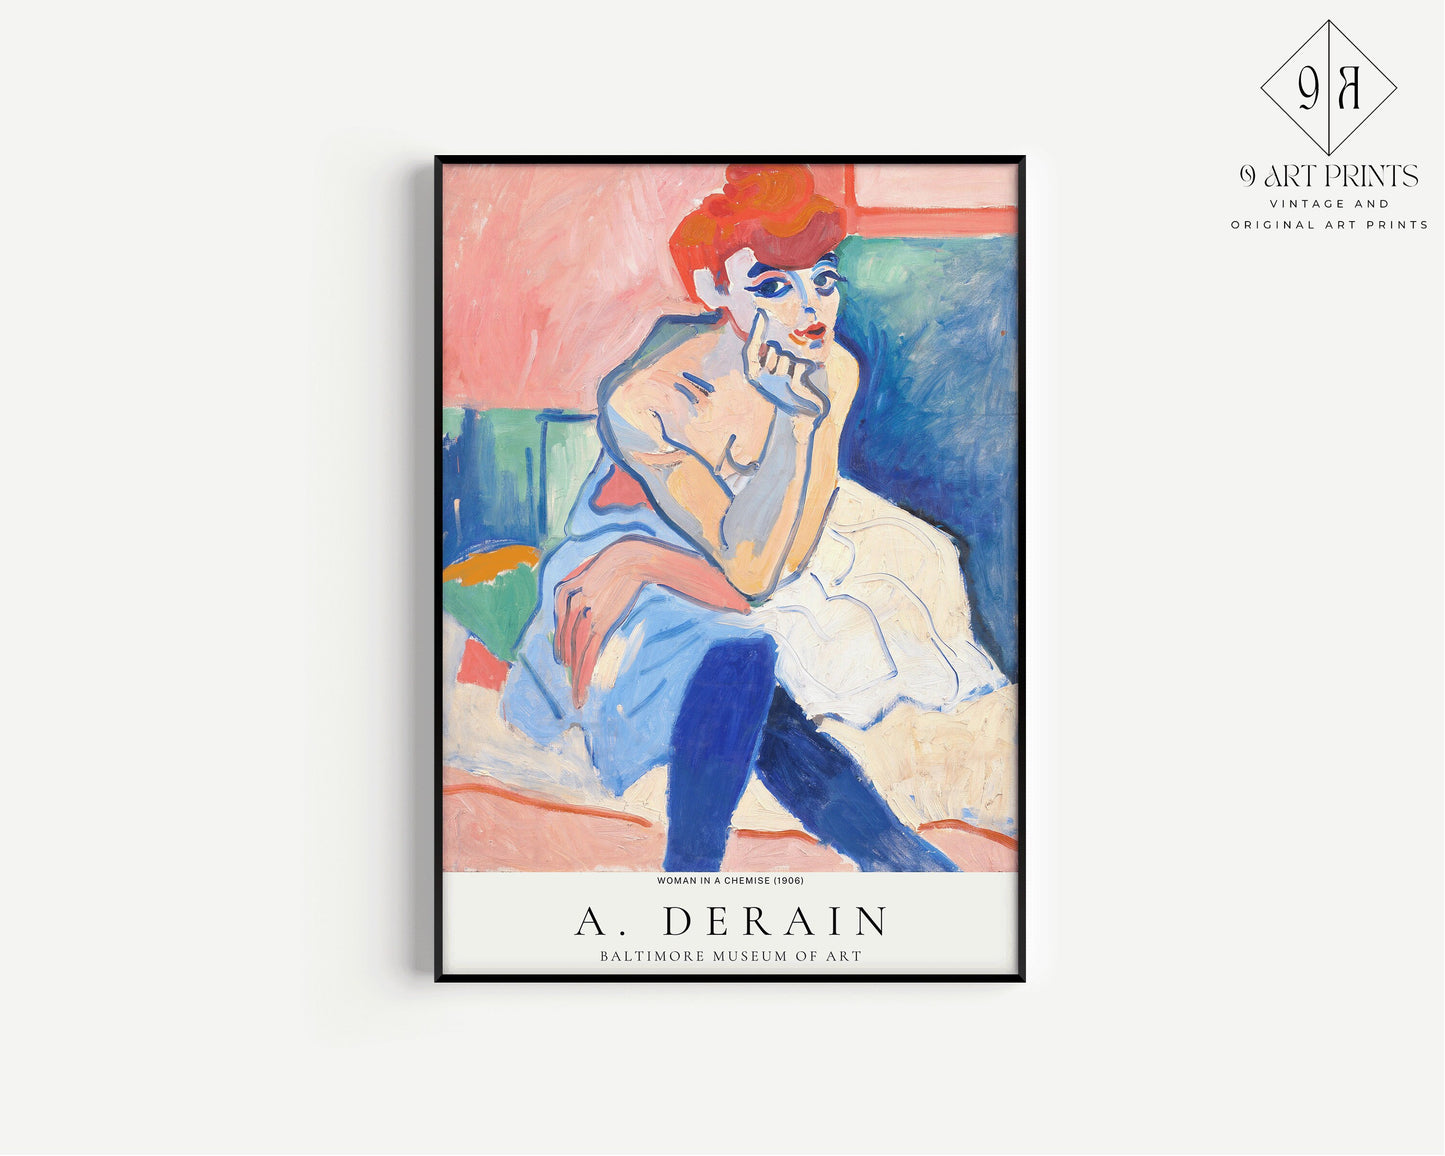 Framed Andre Derain Woman in a Chemise Iconic Famous Painting Art Print Exhibition Museum Poster Ready to Hang Home Office Decor Gift Idea